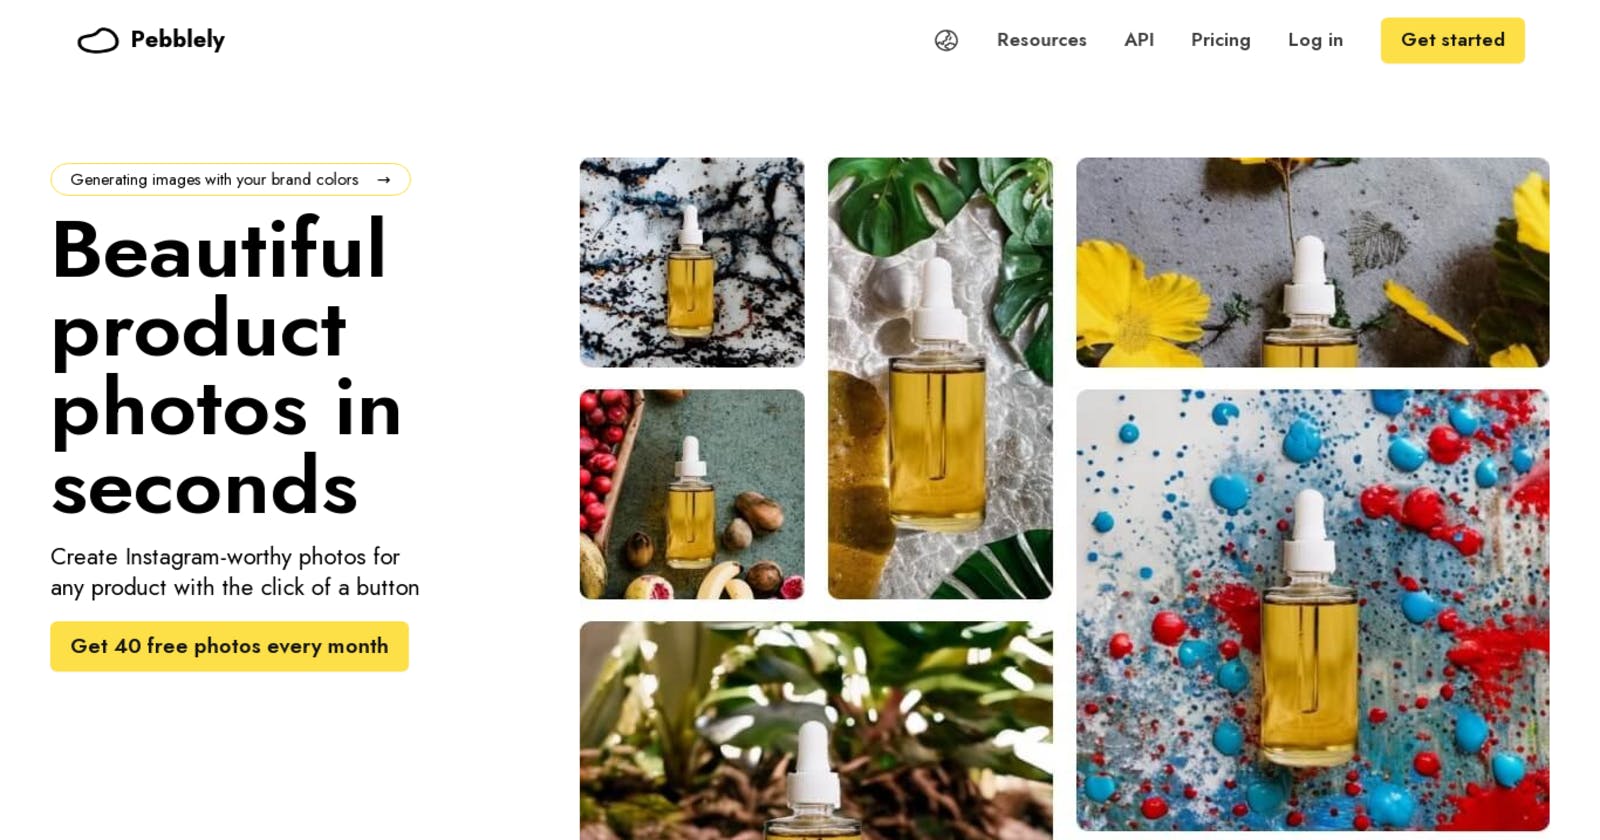 Pebblely: Create Beautiful Product Photos in Seconds